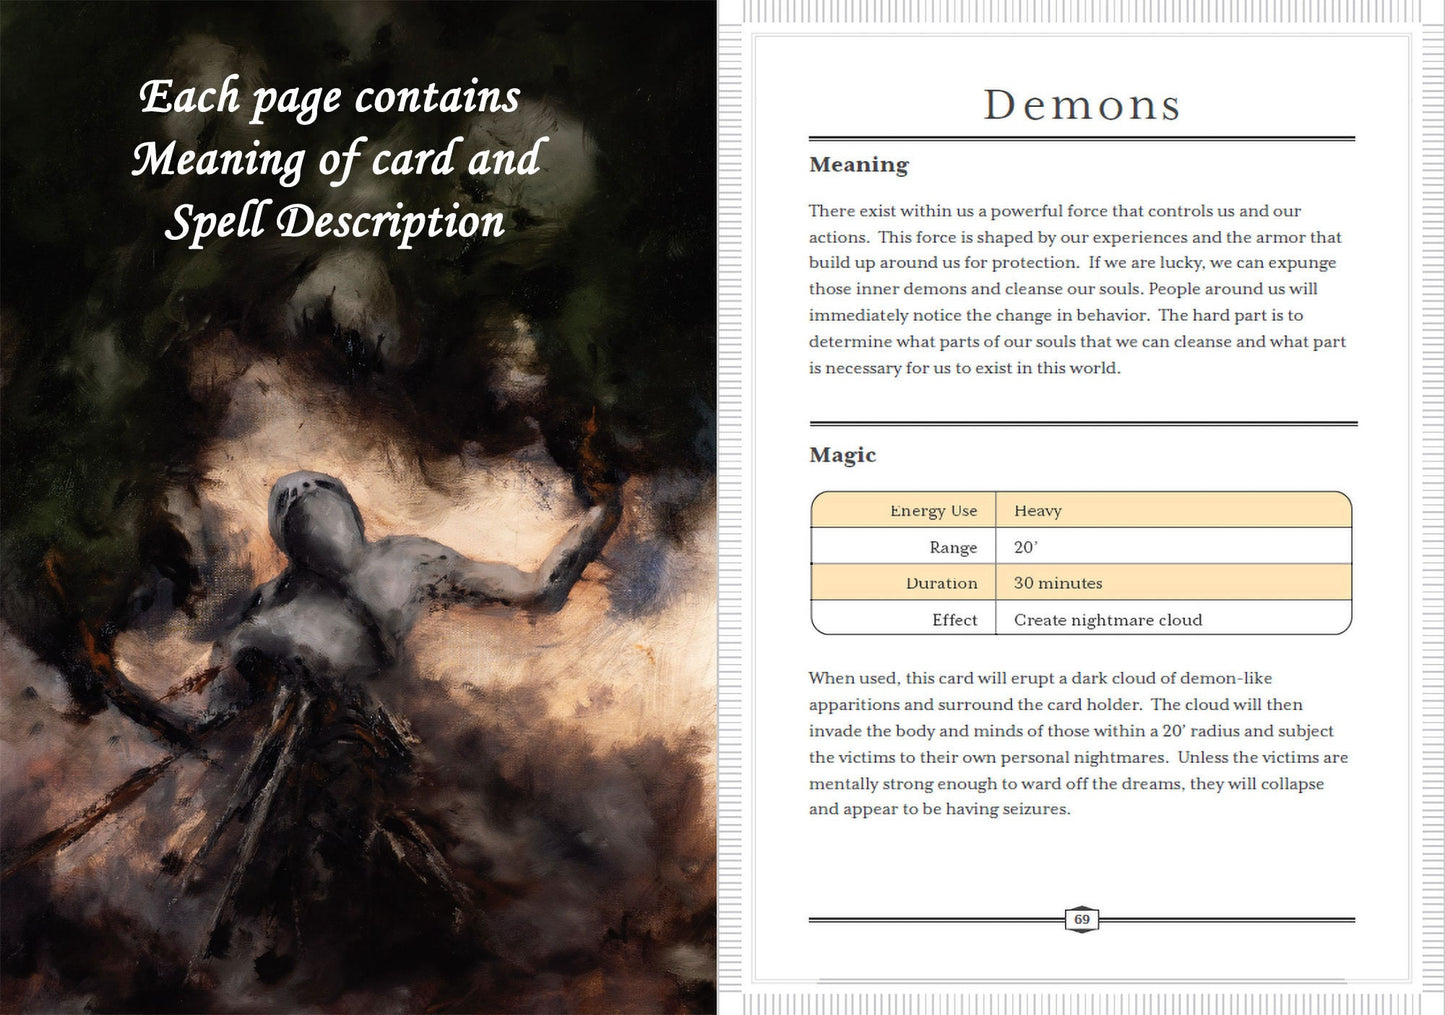 Turmoil Deck with Softcover Guide Book Used for Oracle Reading, Dungeons and Dragons and Story Ideas